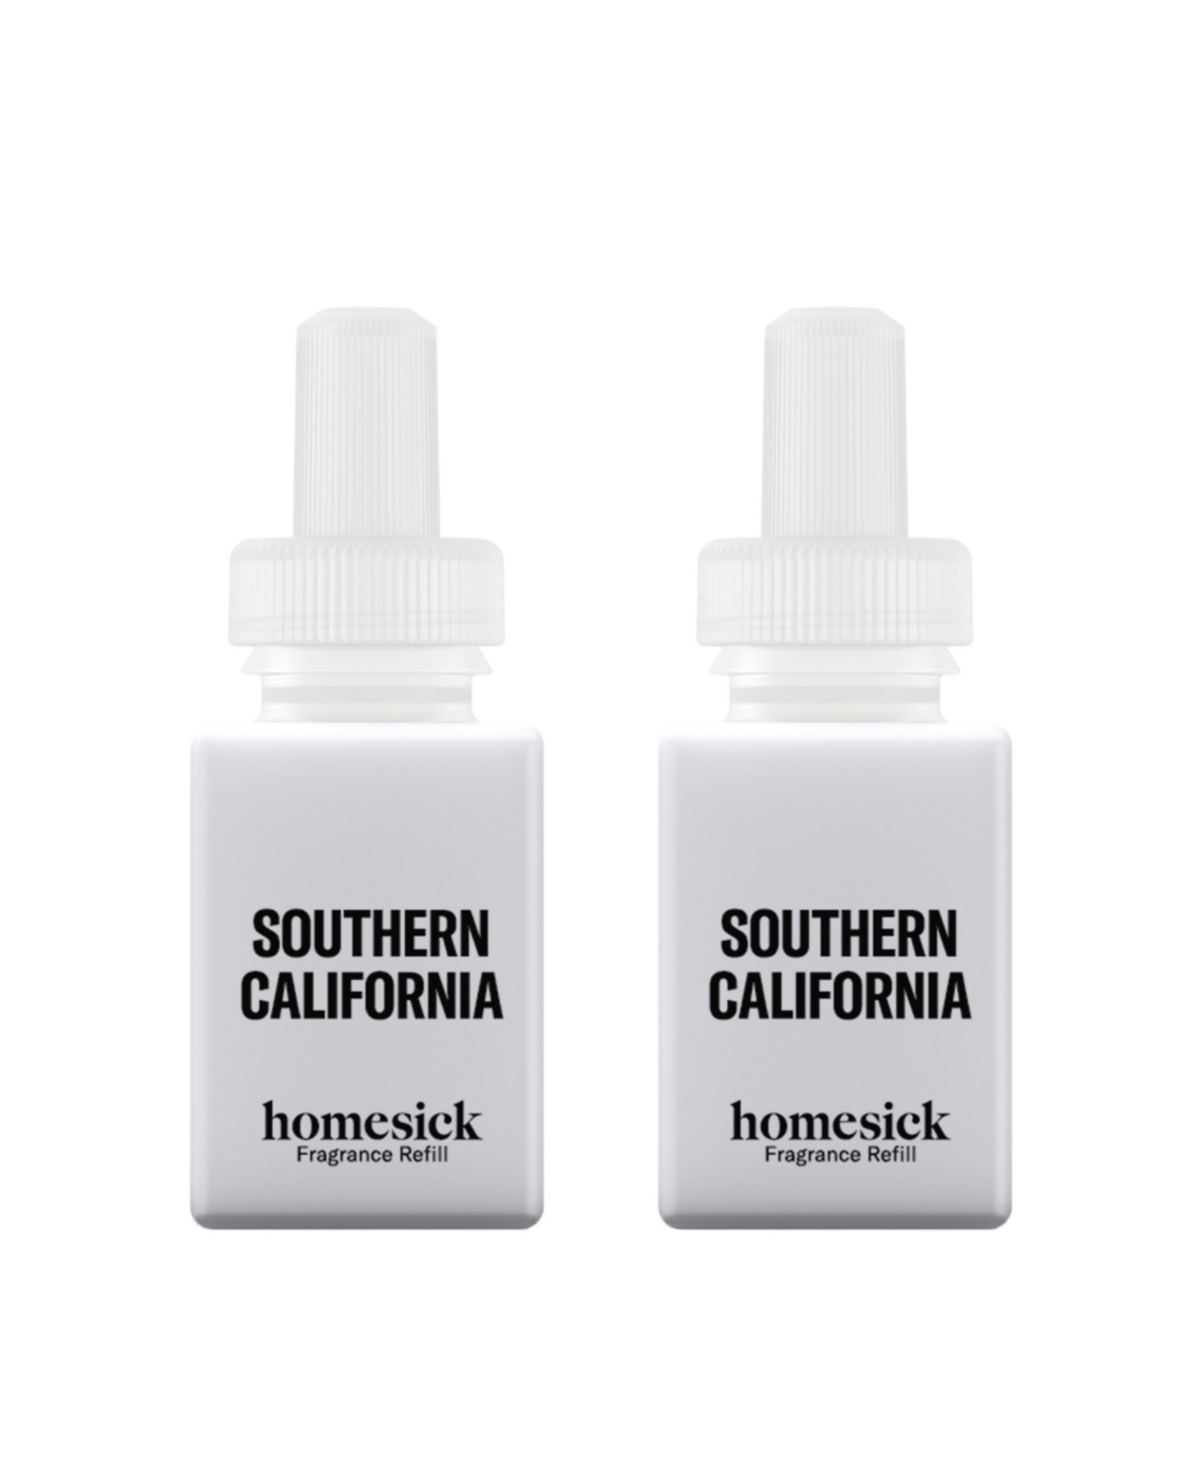 Homesick - Southern California - Home Scent Refill - Smart Home Air Diffuser Fragrance - Up to 120-Hours of Luxury Fragrance per Refill - Clean &